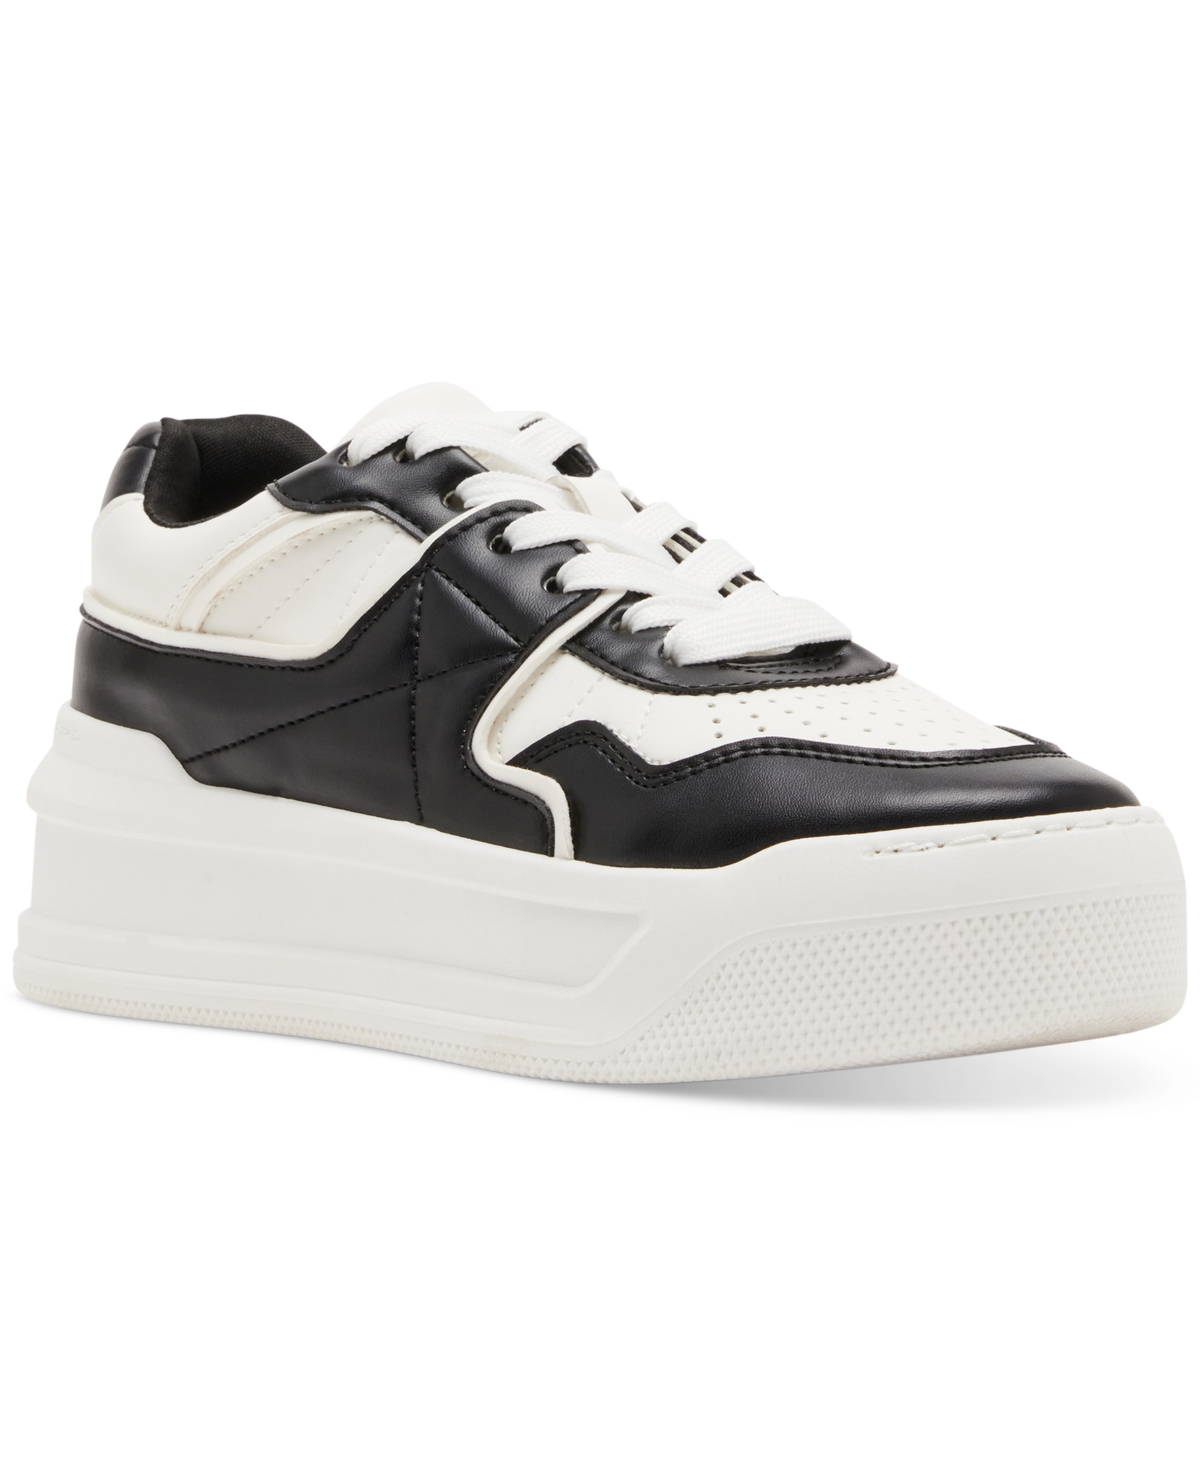 Oley Lace-Up Platform Court Sneakers - White/Black